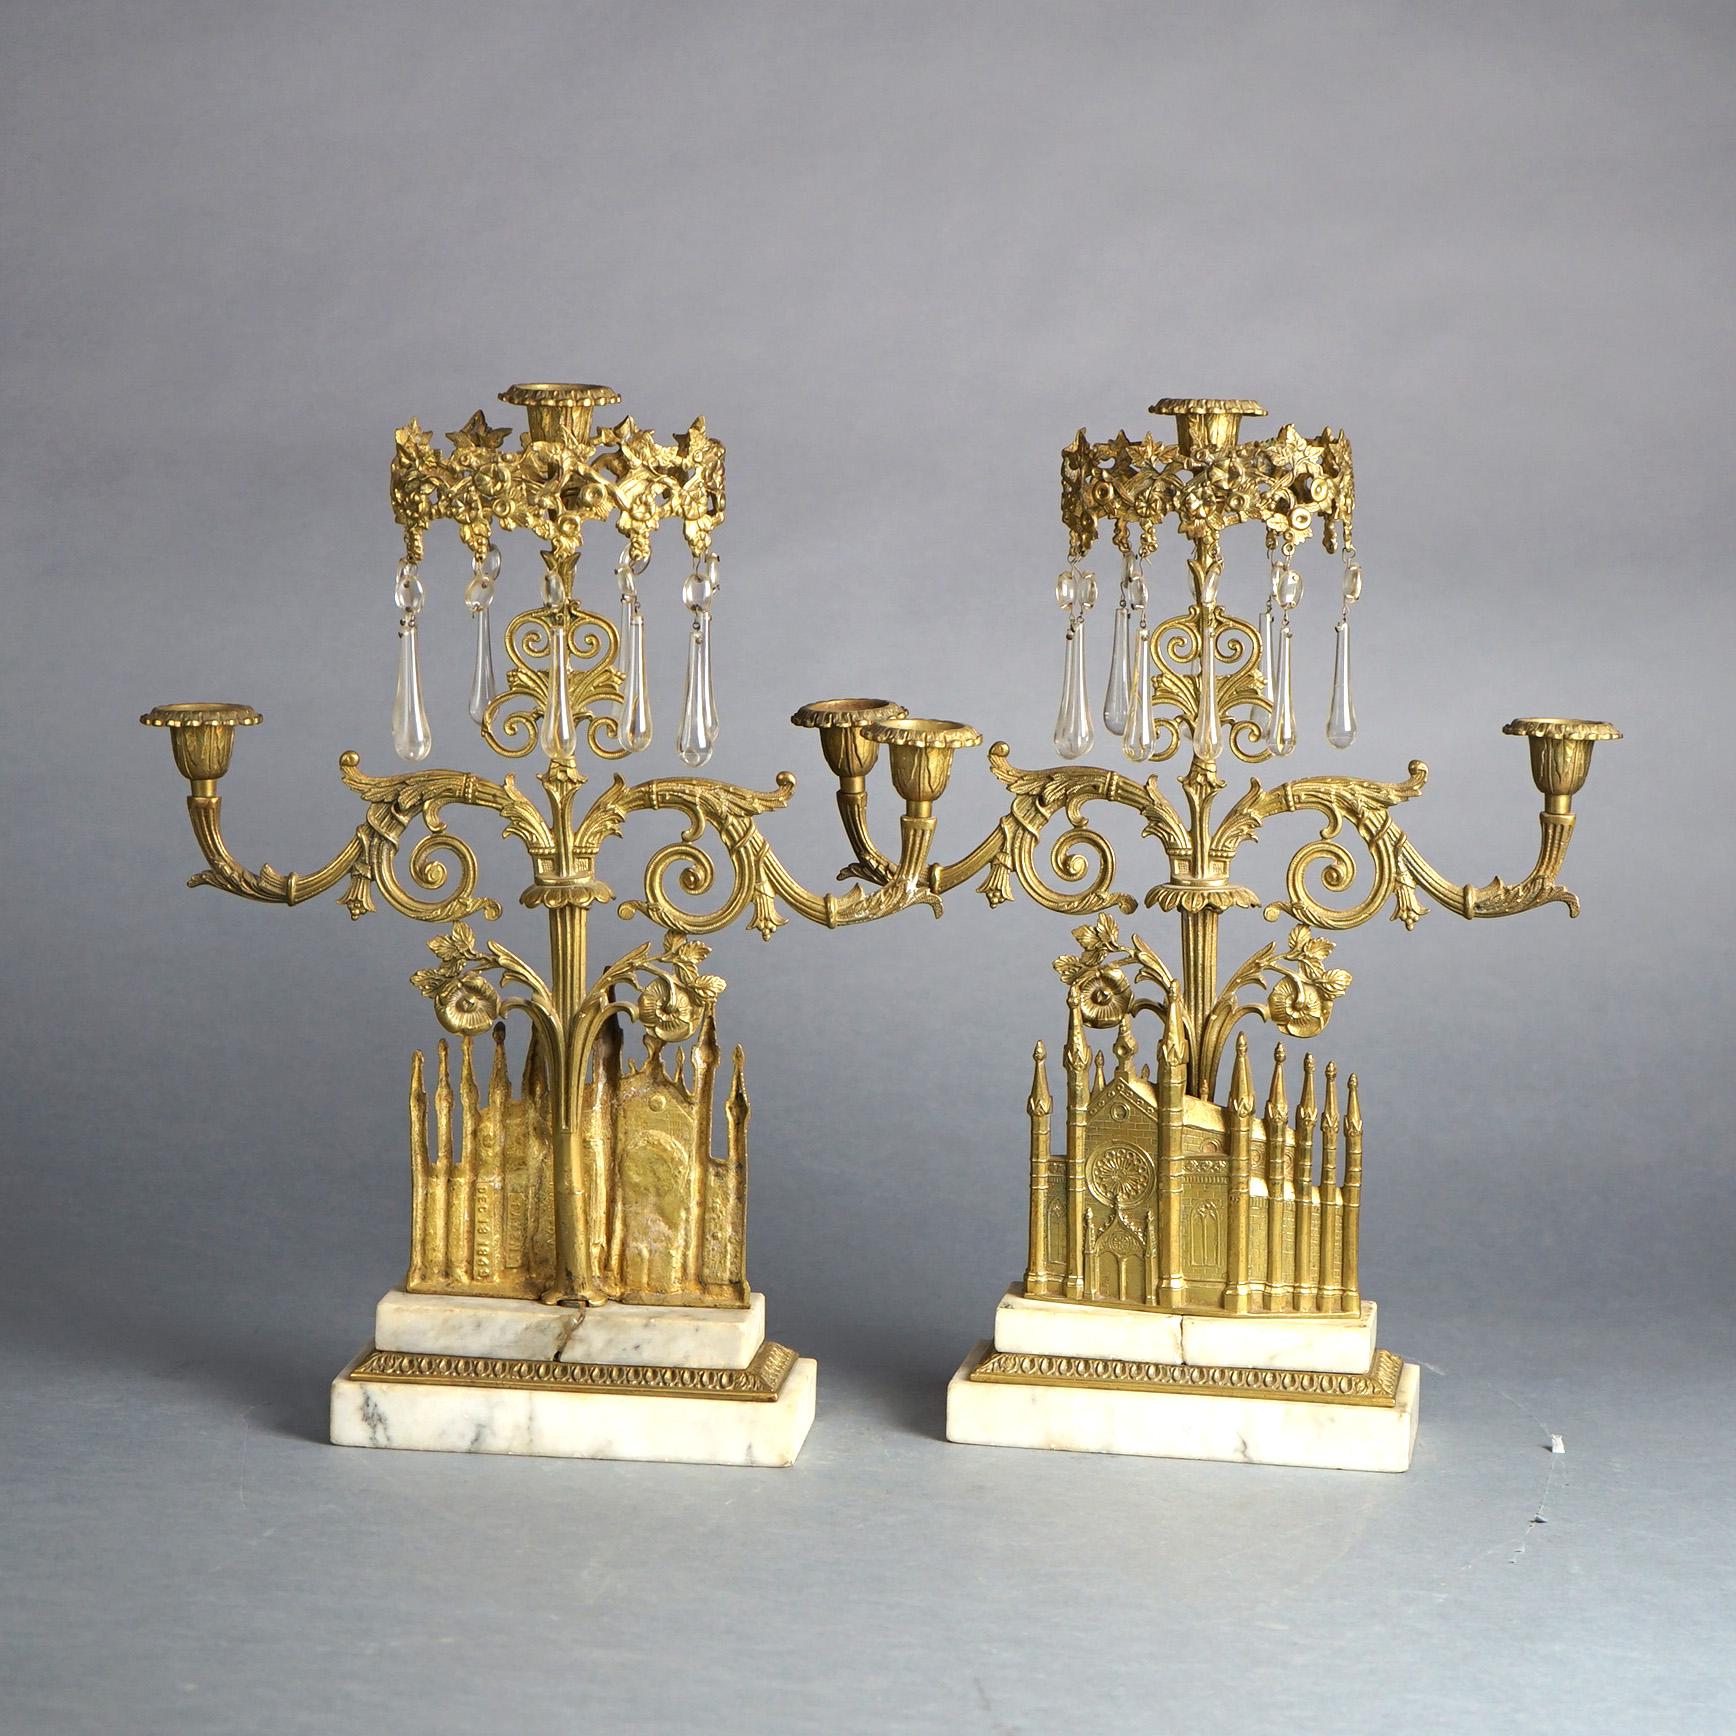 An antique Gothic Revival girandole set offers gilt bronze architectural casting of Bigelow Chapel in Boston, MA surmounted by tree form candelabra with scroll and foliate decorated hanging cut crystals throughout and mounted on marble bases, gothic